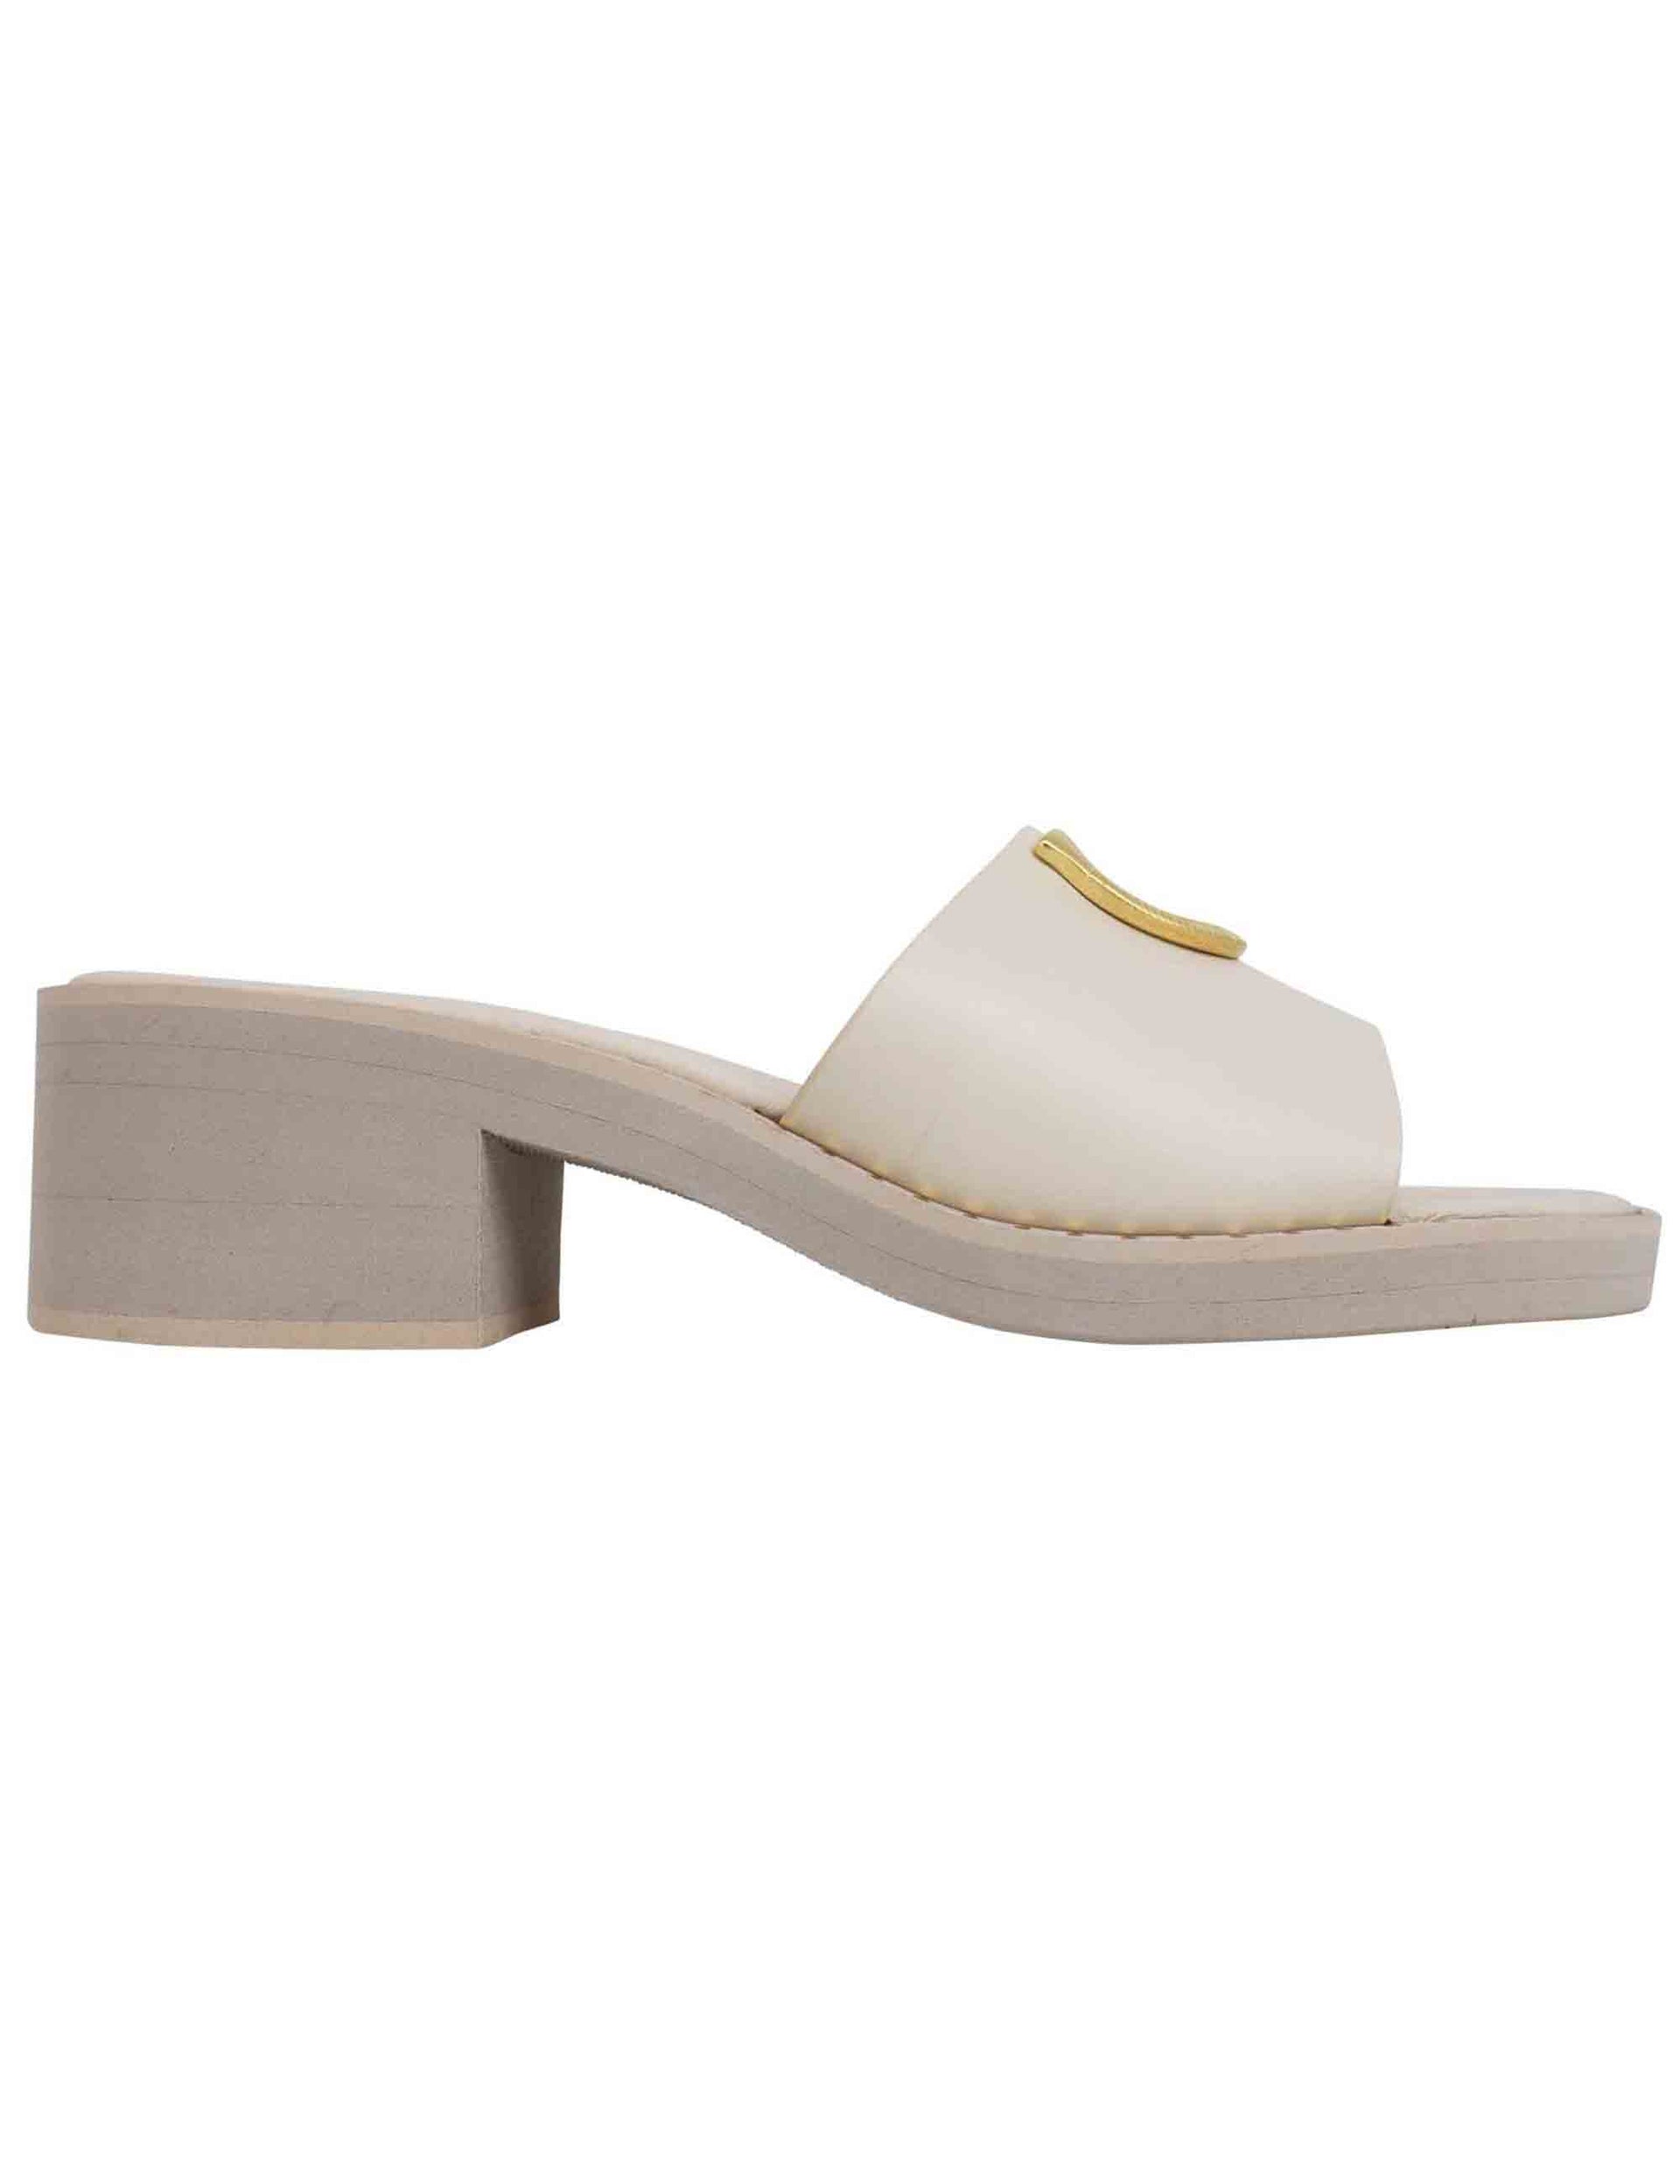 Women's off-white leather sandals with gold stud and ultra-light rubber sole